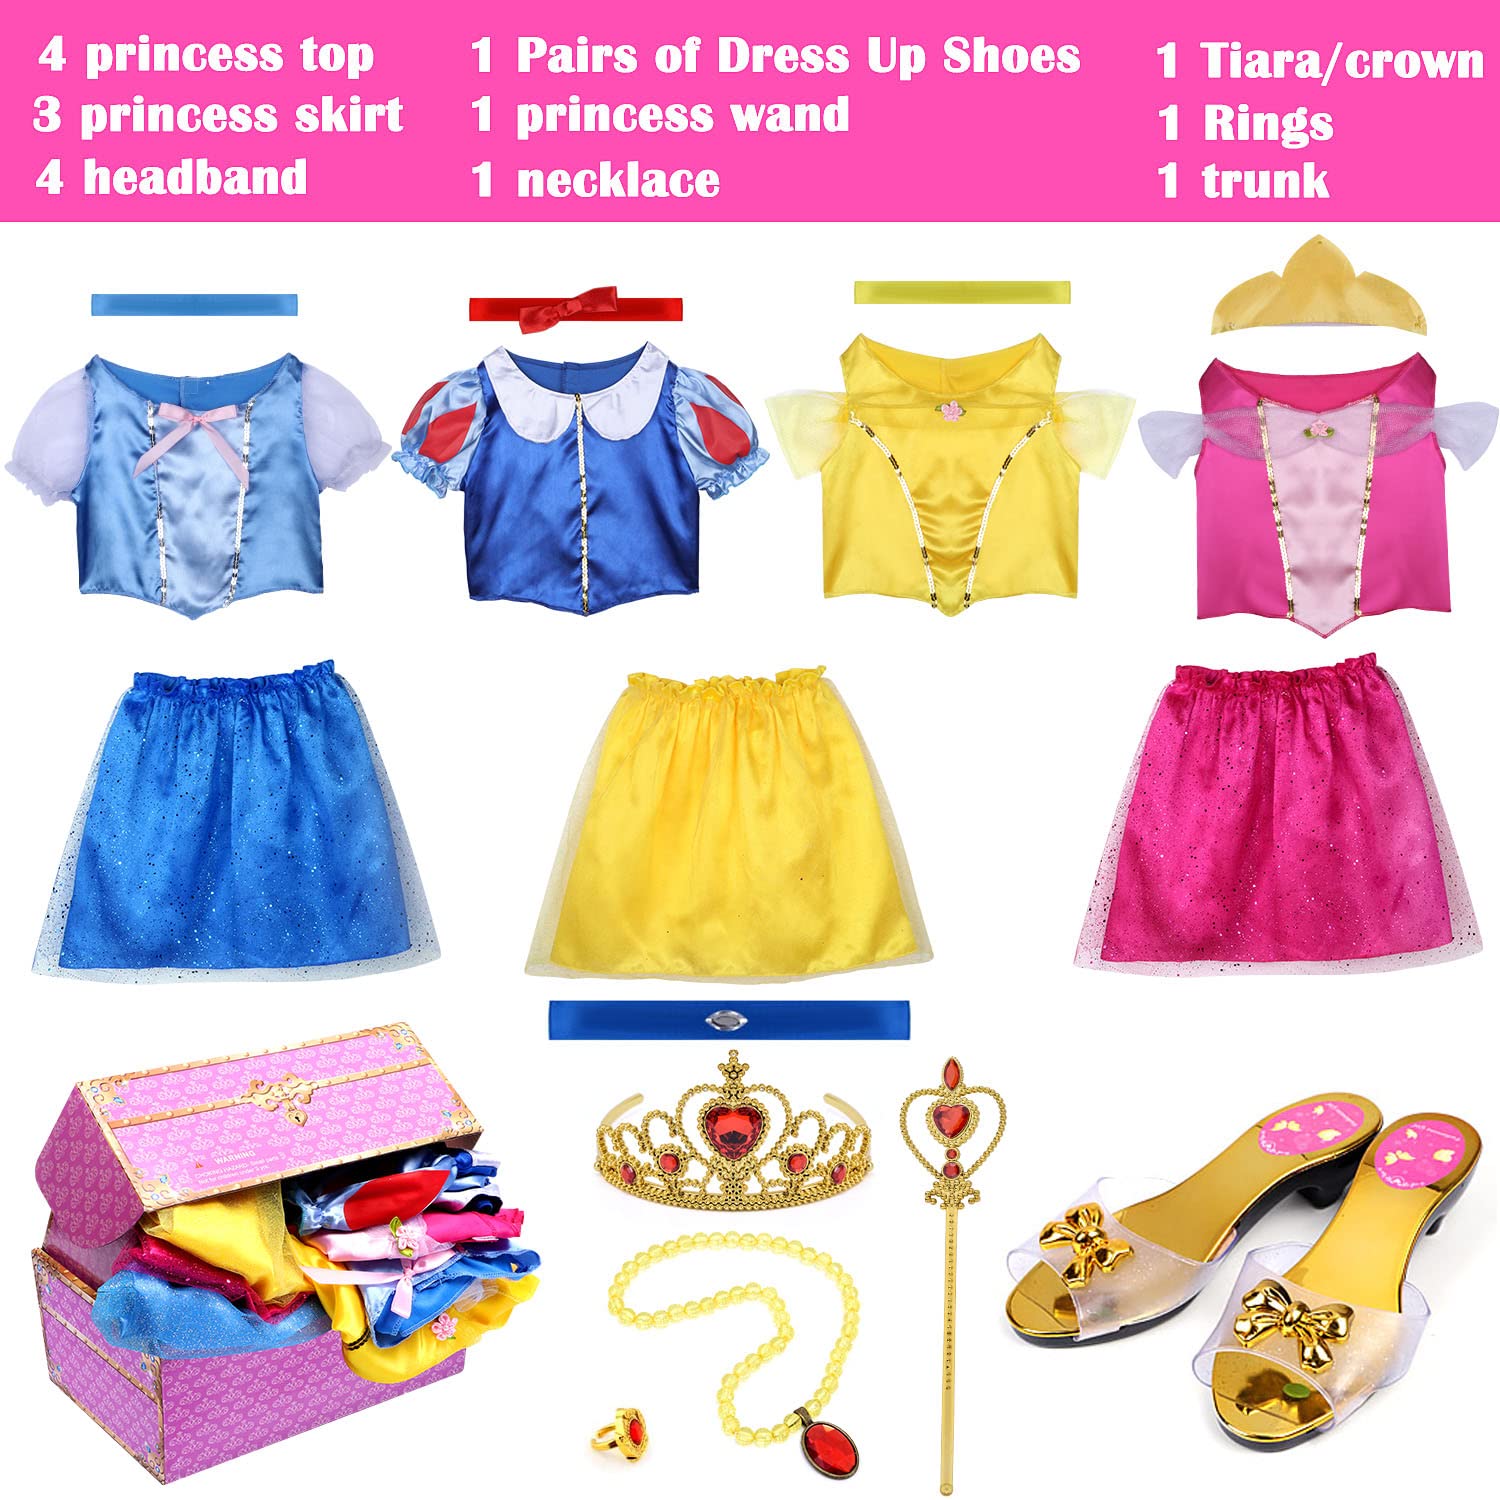 Latocos 17 Pcs Girls Princess Dress Up Trunk Role Play Cosplay Set with Princess Shoes Crown Accessories Princess Costume for Kids Age 3-6 Years